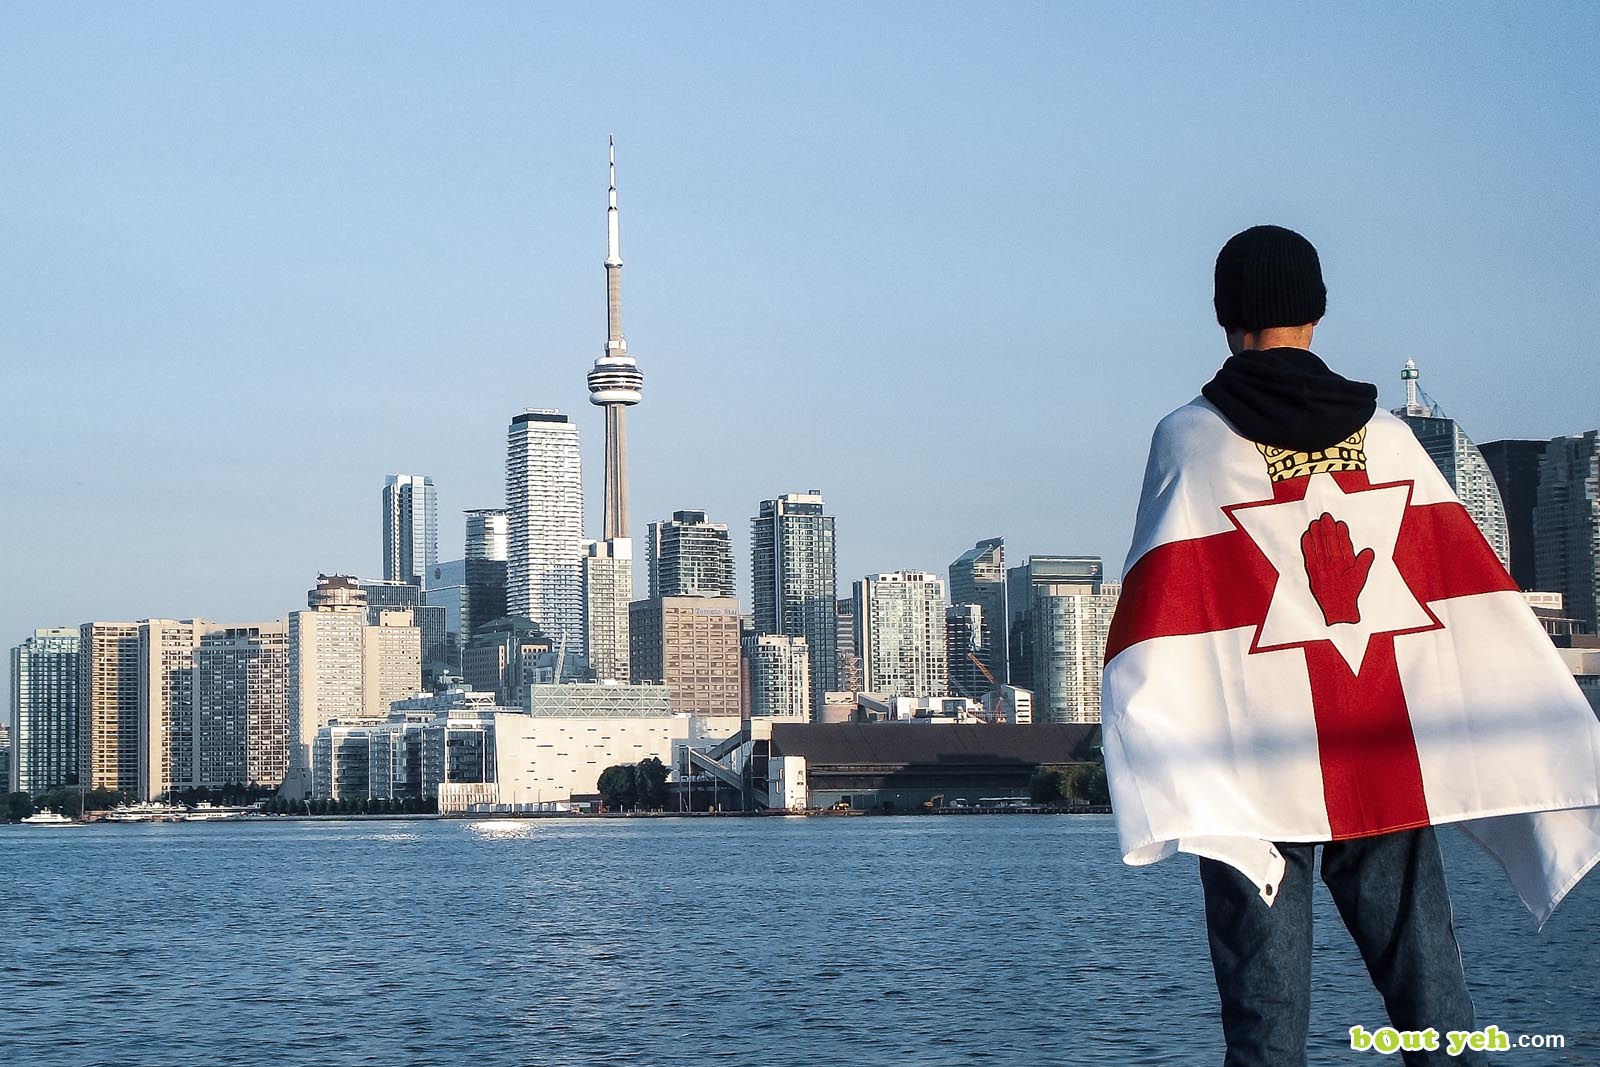 Andrew McLaughlin wearing Ulster flag in front of Toronto Canada - photo 4924 shared by Bout Yeh photographers Belfast